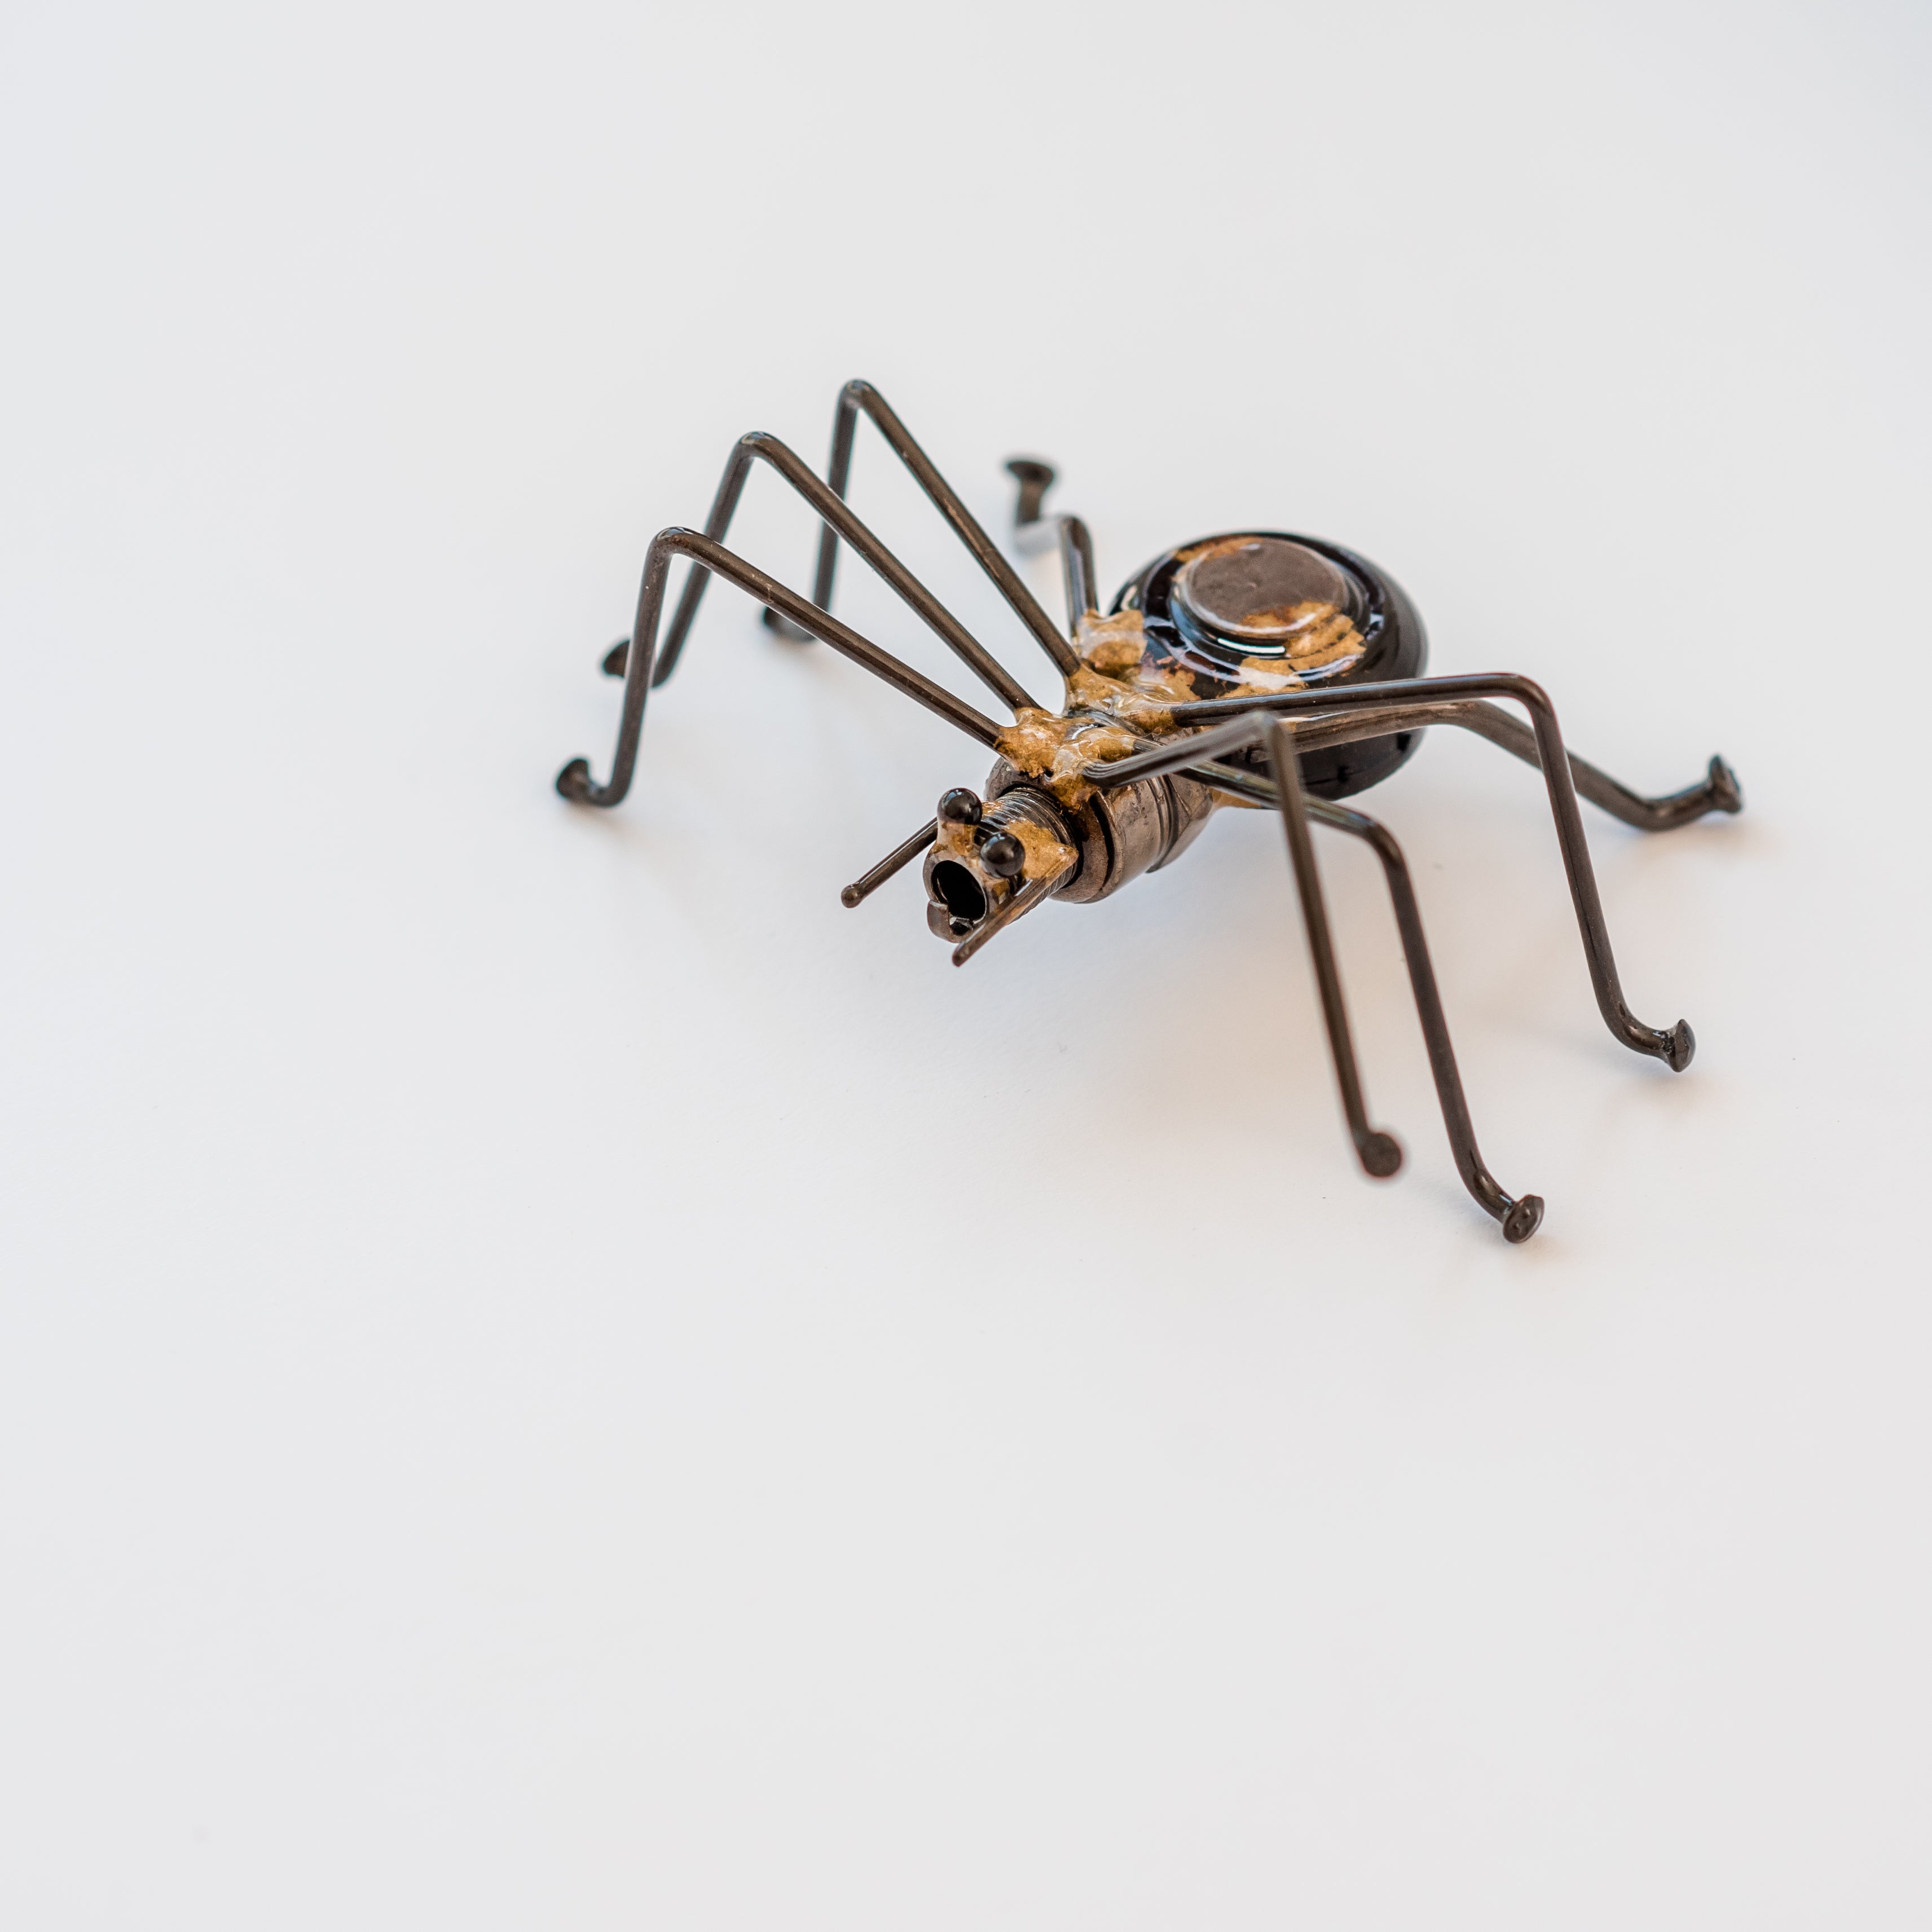 Small Spider Sculpture, Recycled Metal